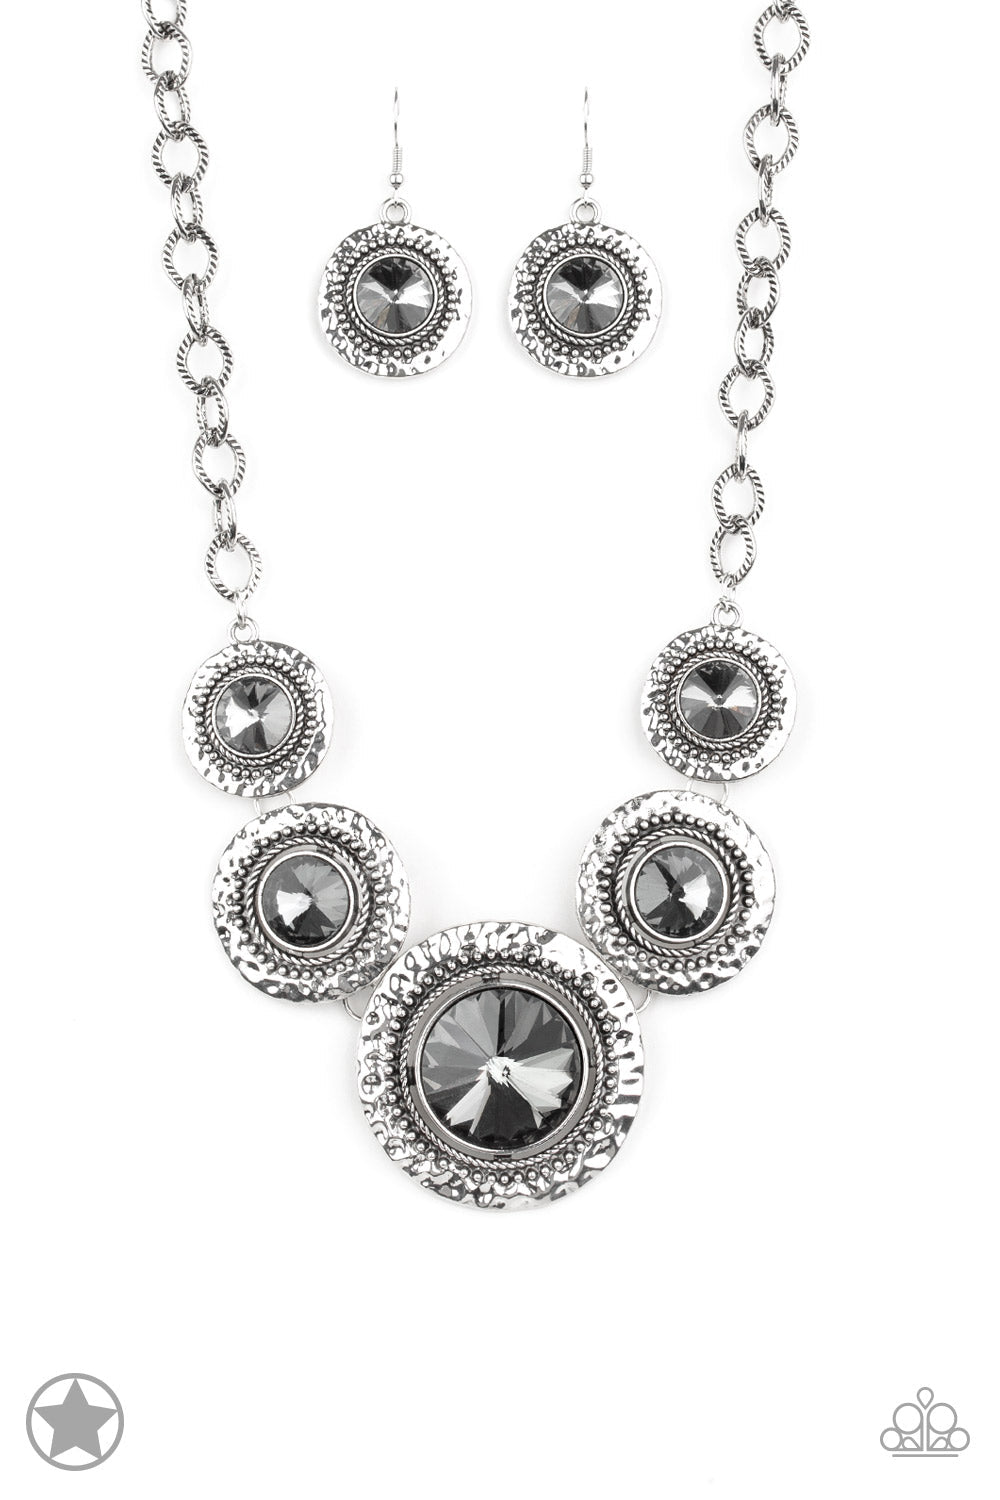 Global Glamour - Silver Necklace - Paparazzi Accessories - Dramatically oversized smoky gems are pressed into the centers of hammered and silver studded frames. The blinding frames link below the collar for a glamorous, statement-making stylish necklace. Bejeweled Accessories By Kristie - Trendy fashion jewelry for everyone -